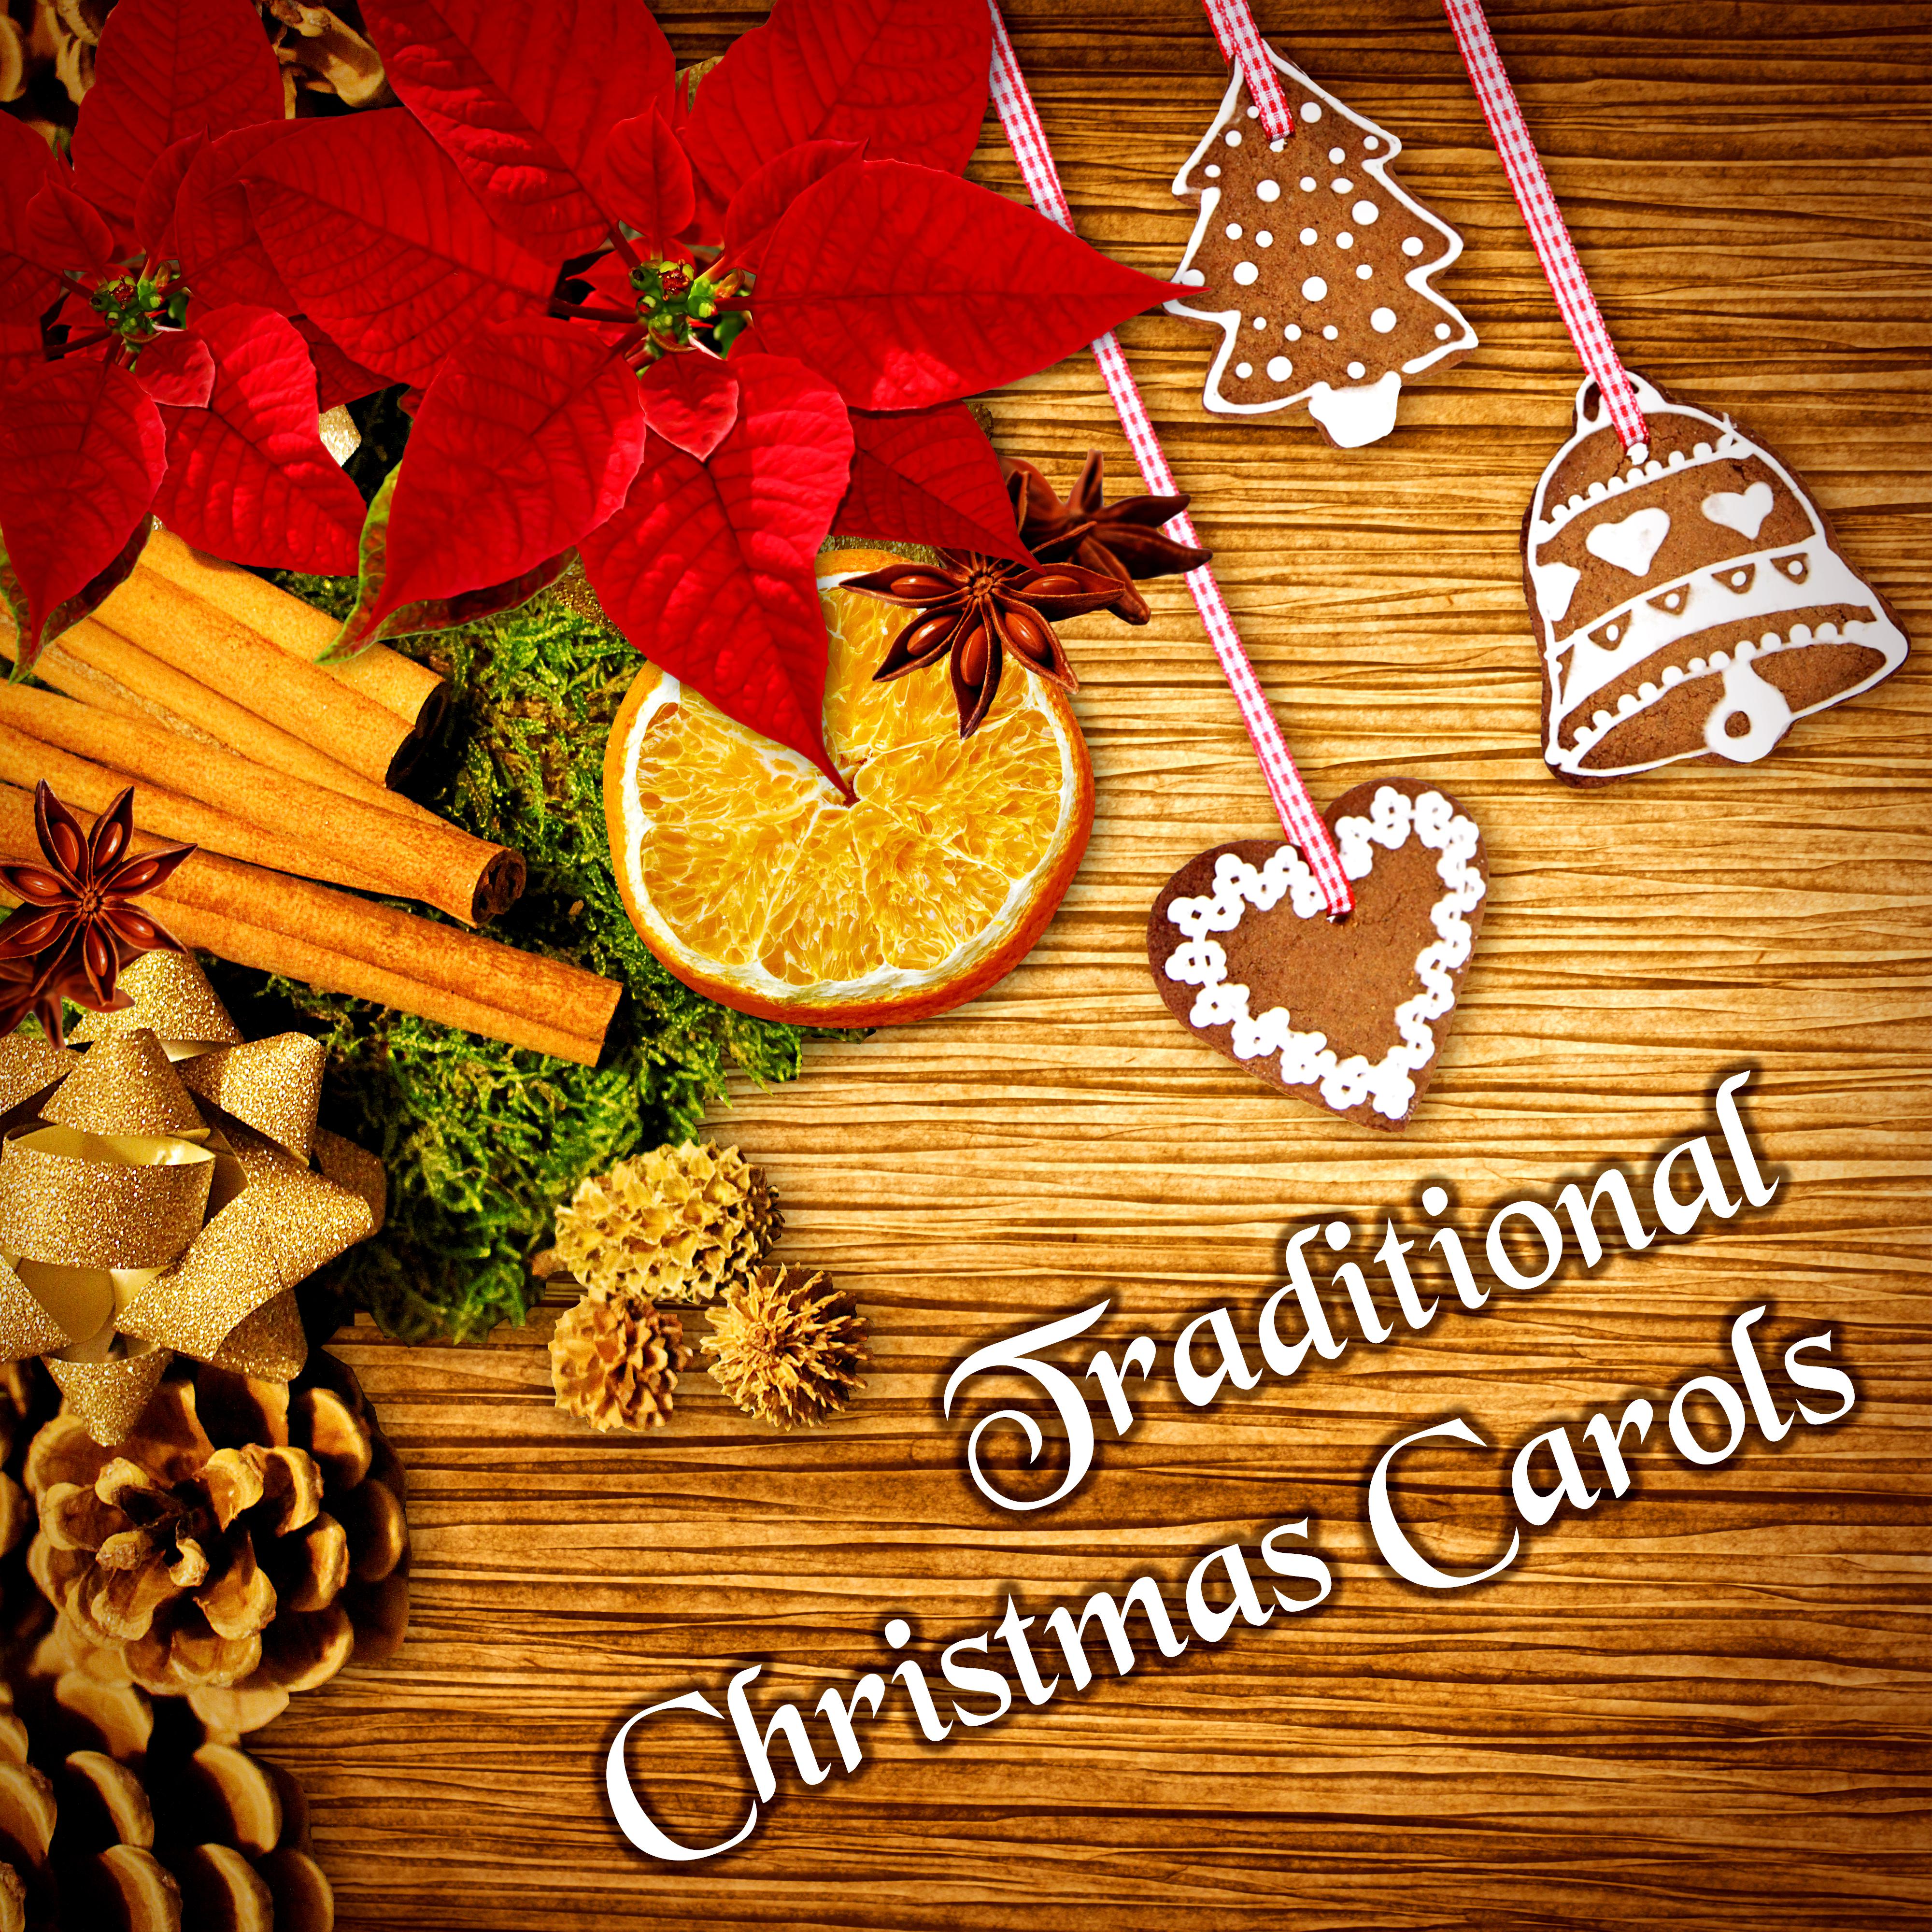 Traditional Christmas Carols - The Best Xmas Songs, Instrumental Melodies for Winter Holiday